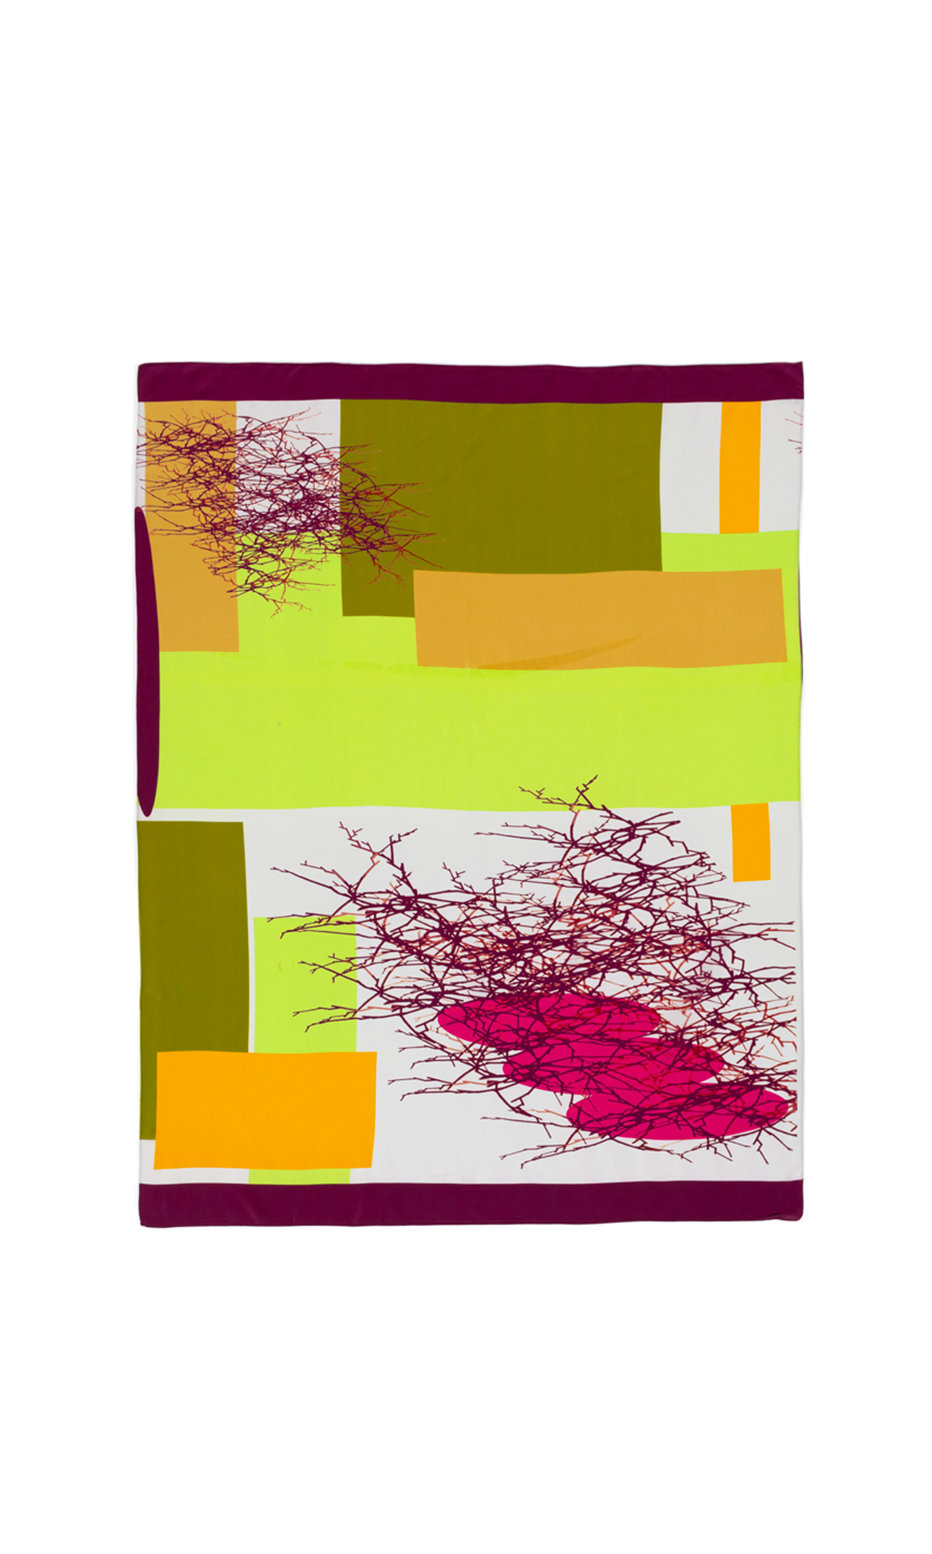 abstract silk scarf